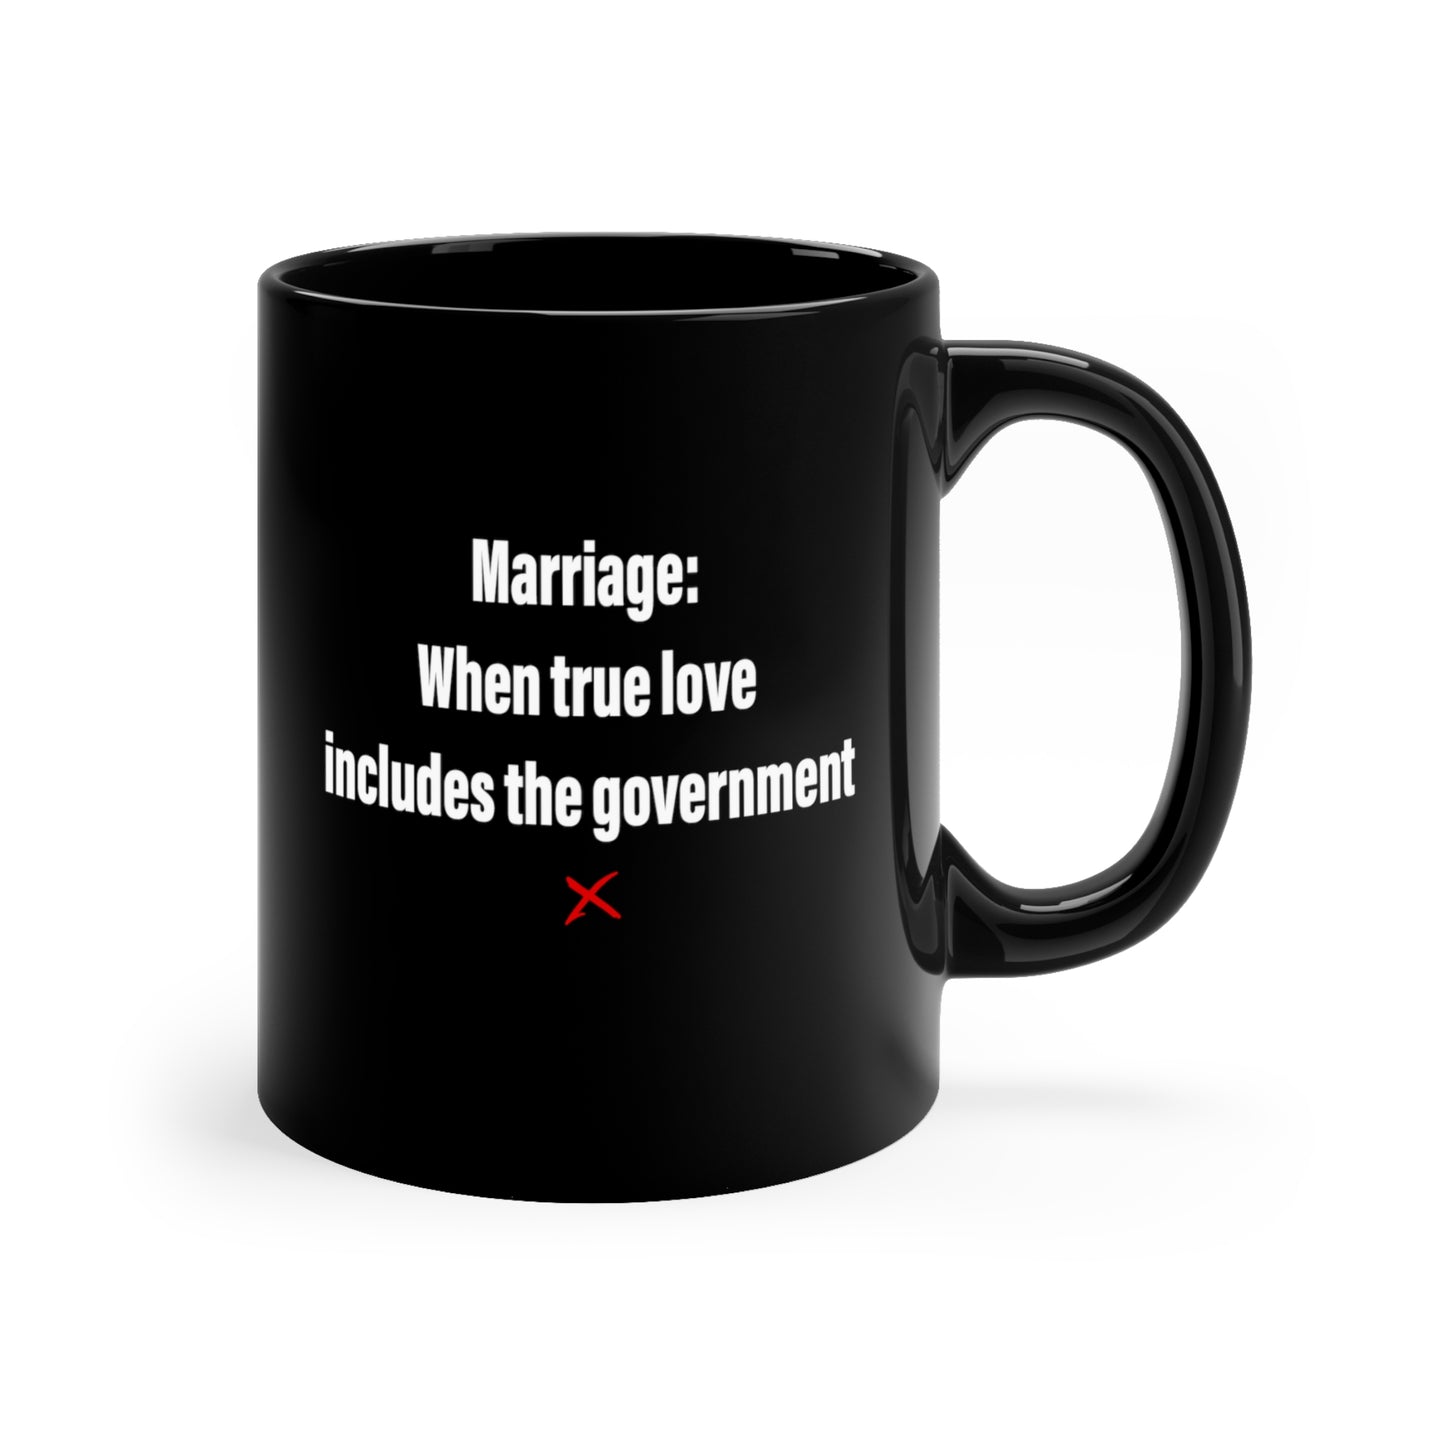 Marriage: When true love includes the government - Mug